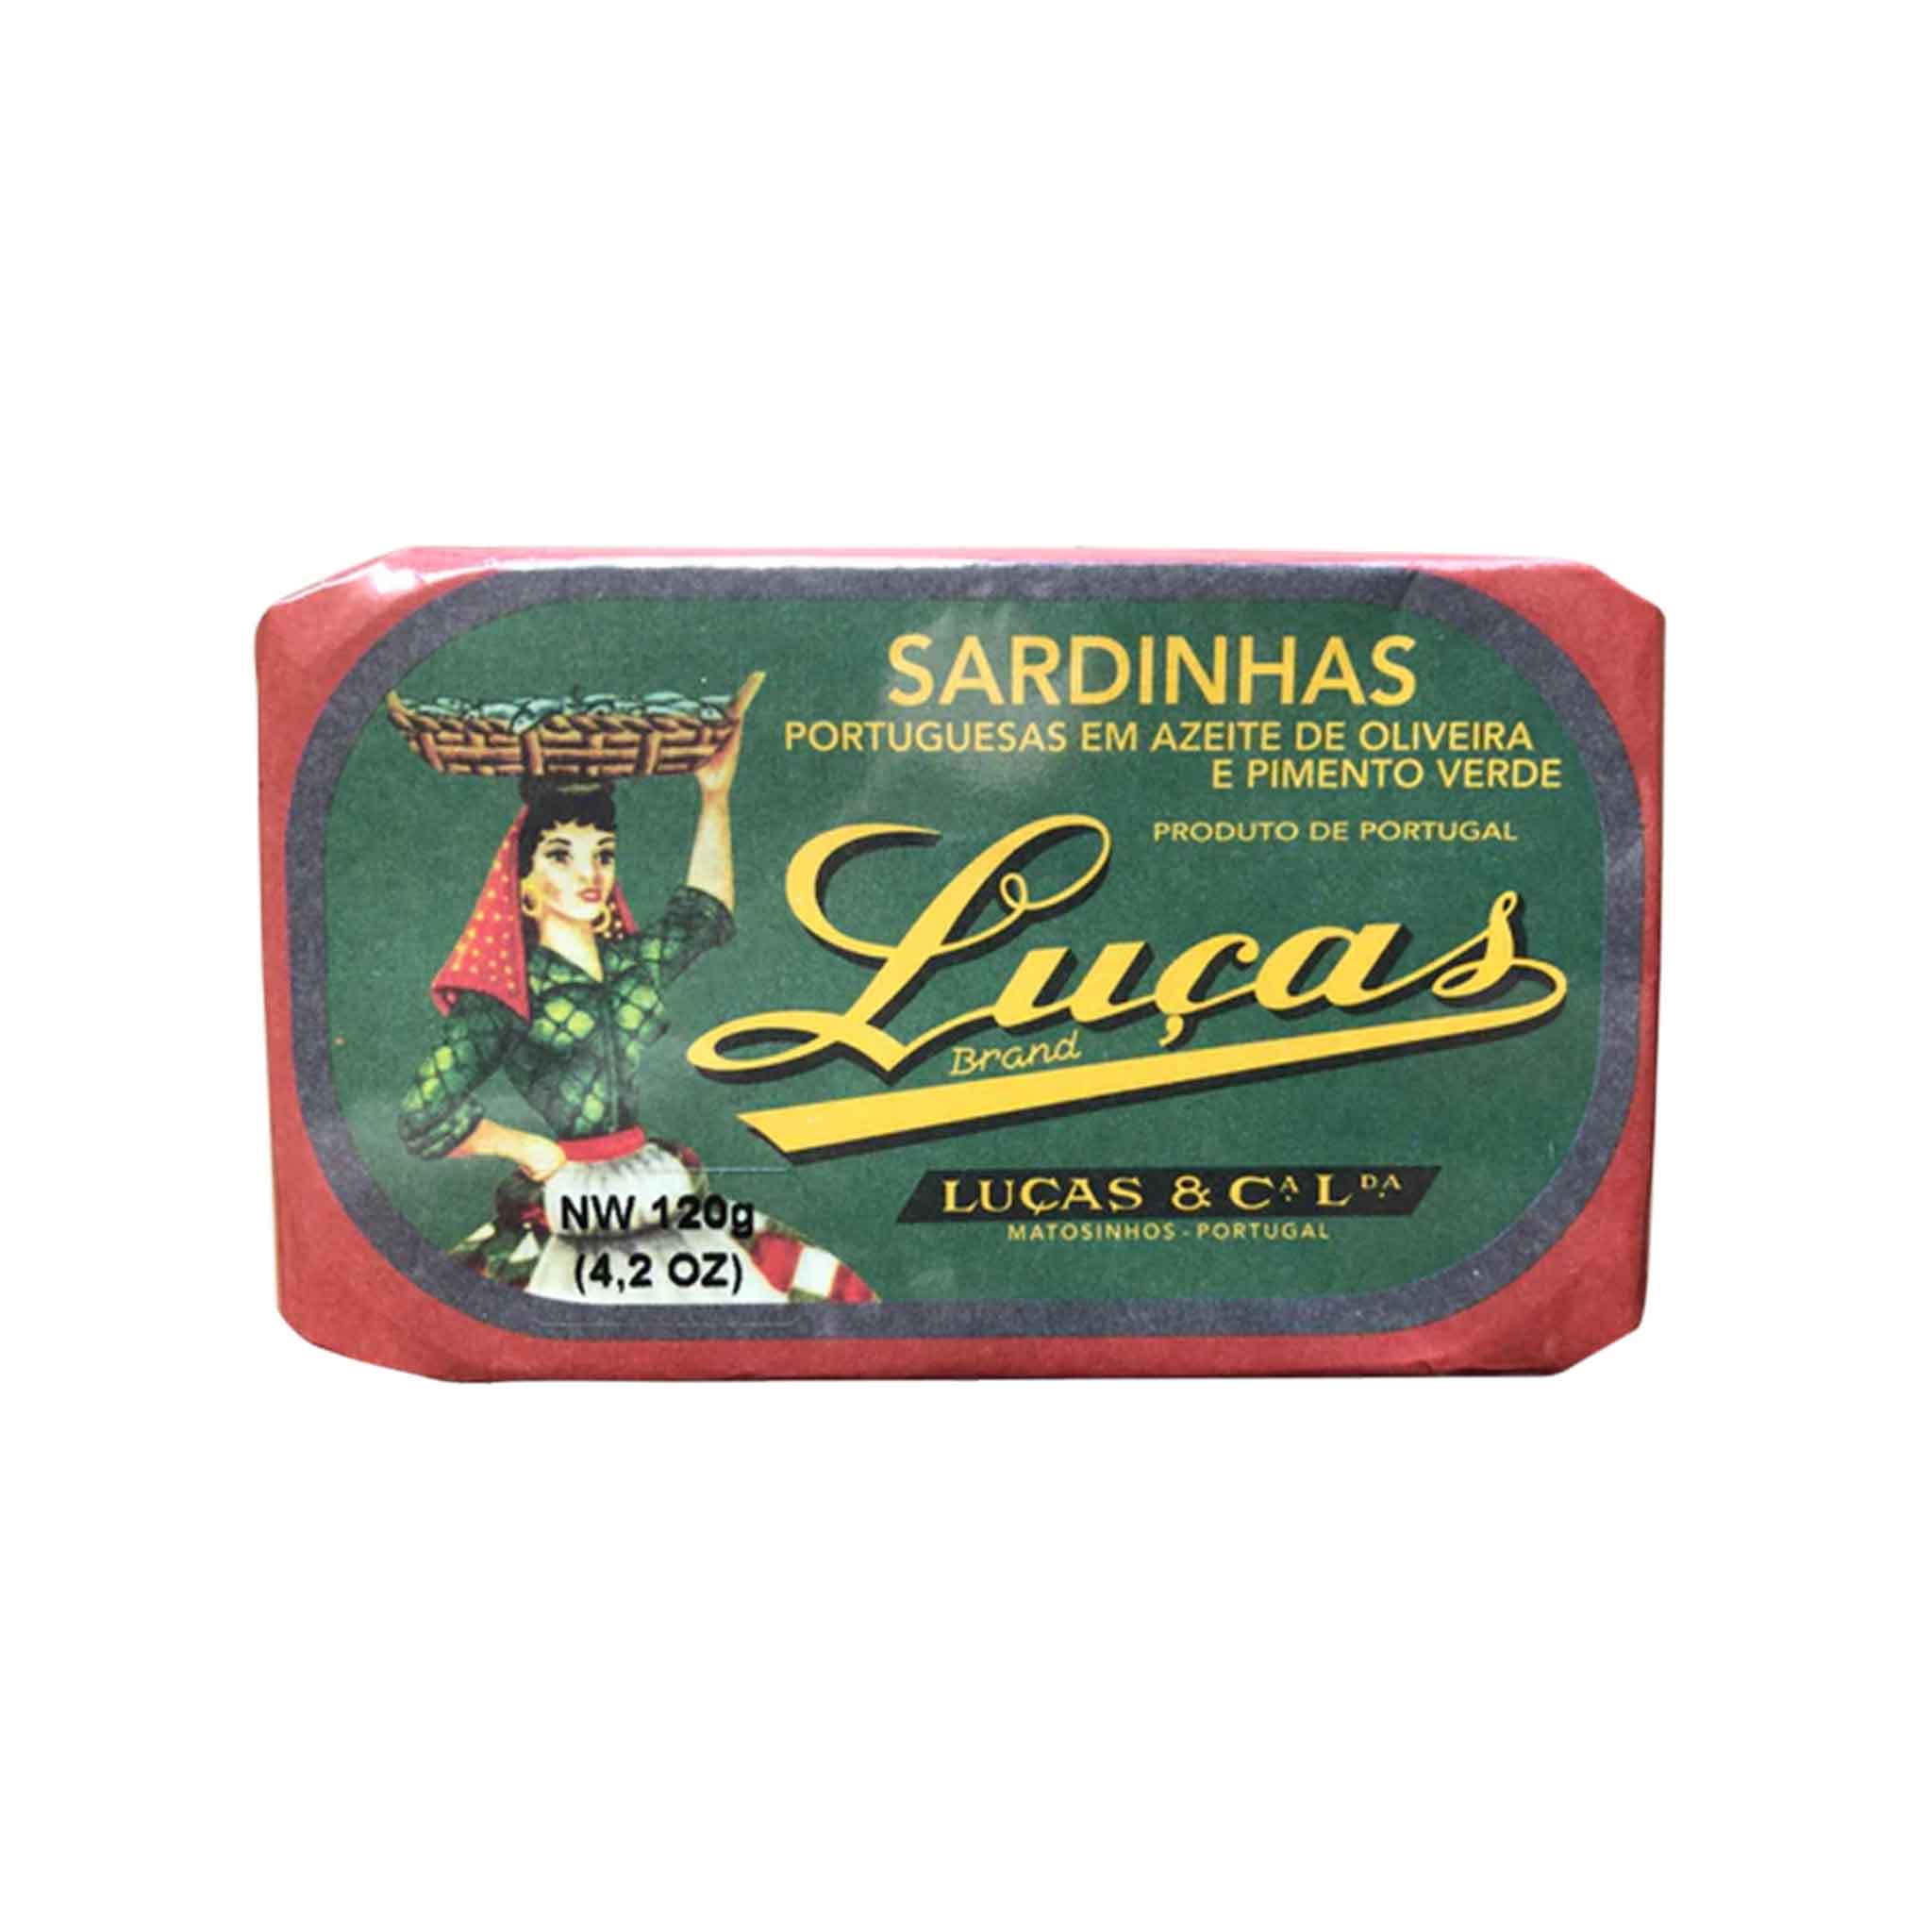 LUCAS SARDINES IN OLIVE OIL AND GREEN PEPPER 120g